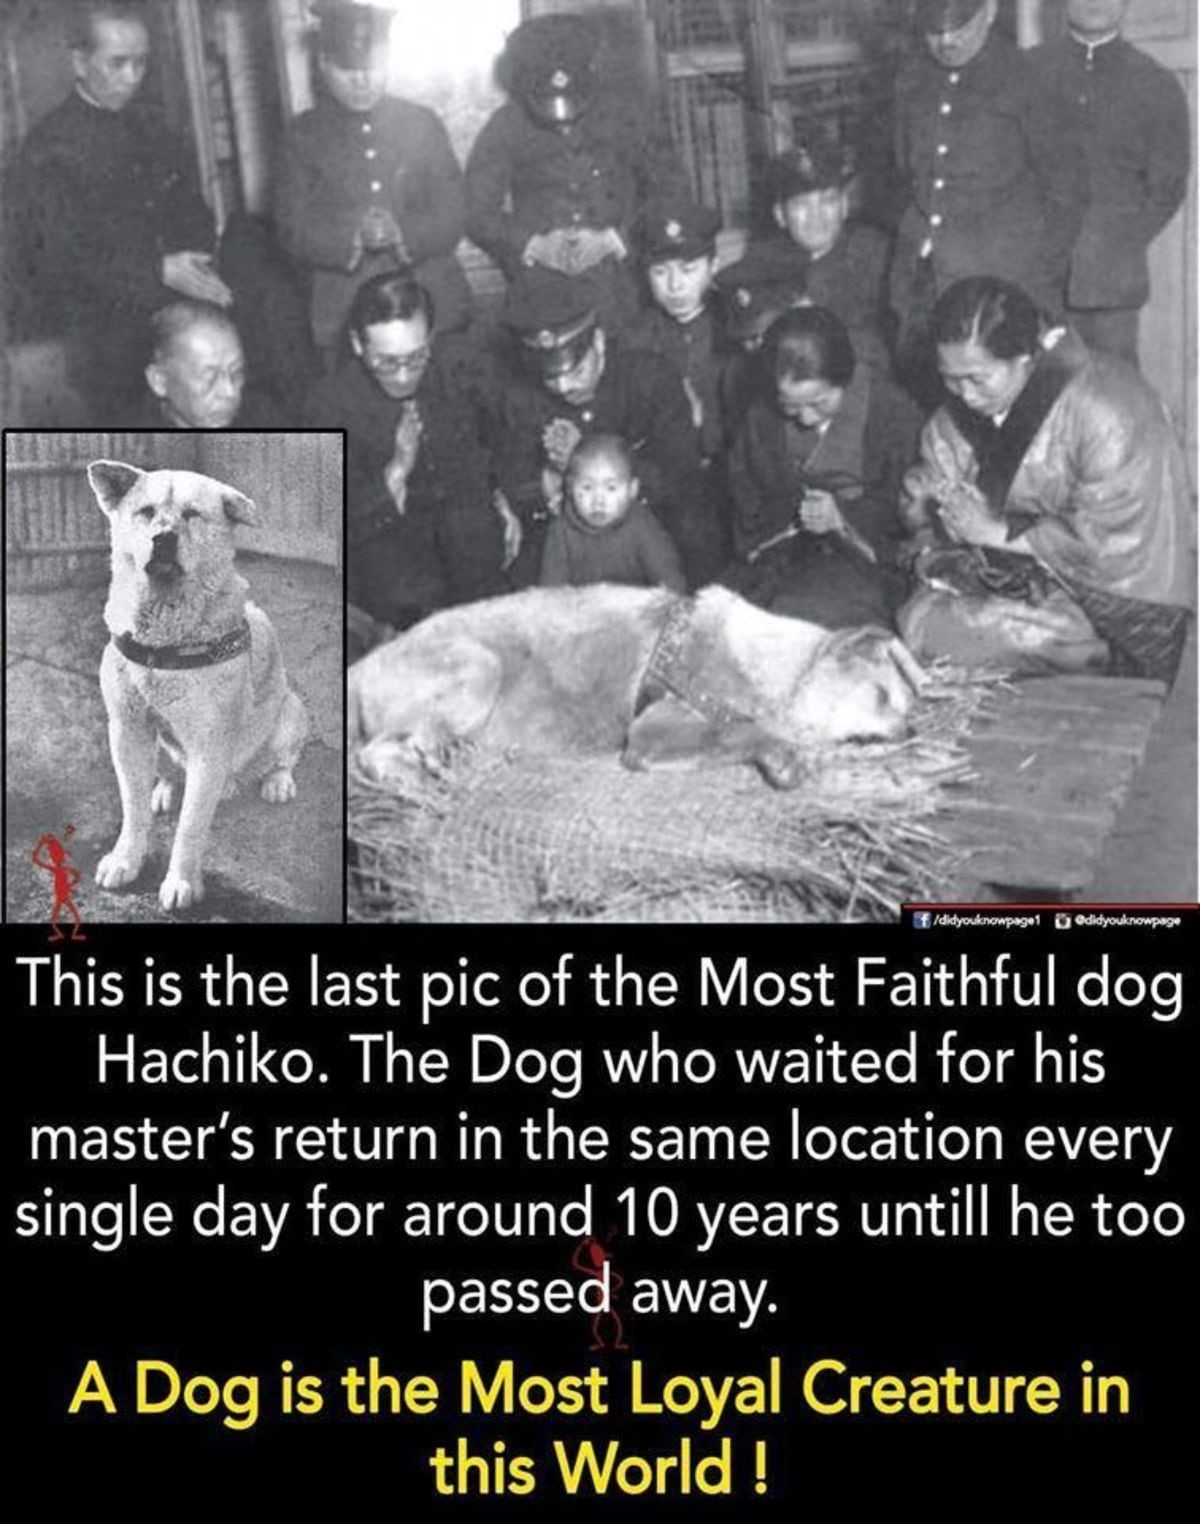 Loyal Dog. .. There's more to the story. His owner was Hidesaburō Ueno, a professor at the Tokyo Imperial University, and had picked Hachiko up as a puppy. Eventually he bega